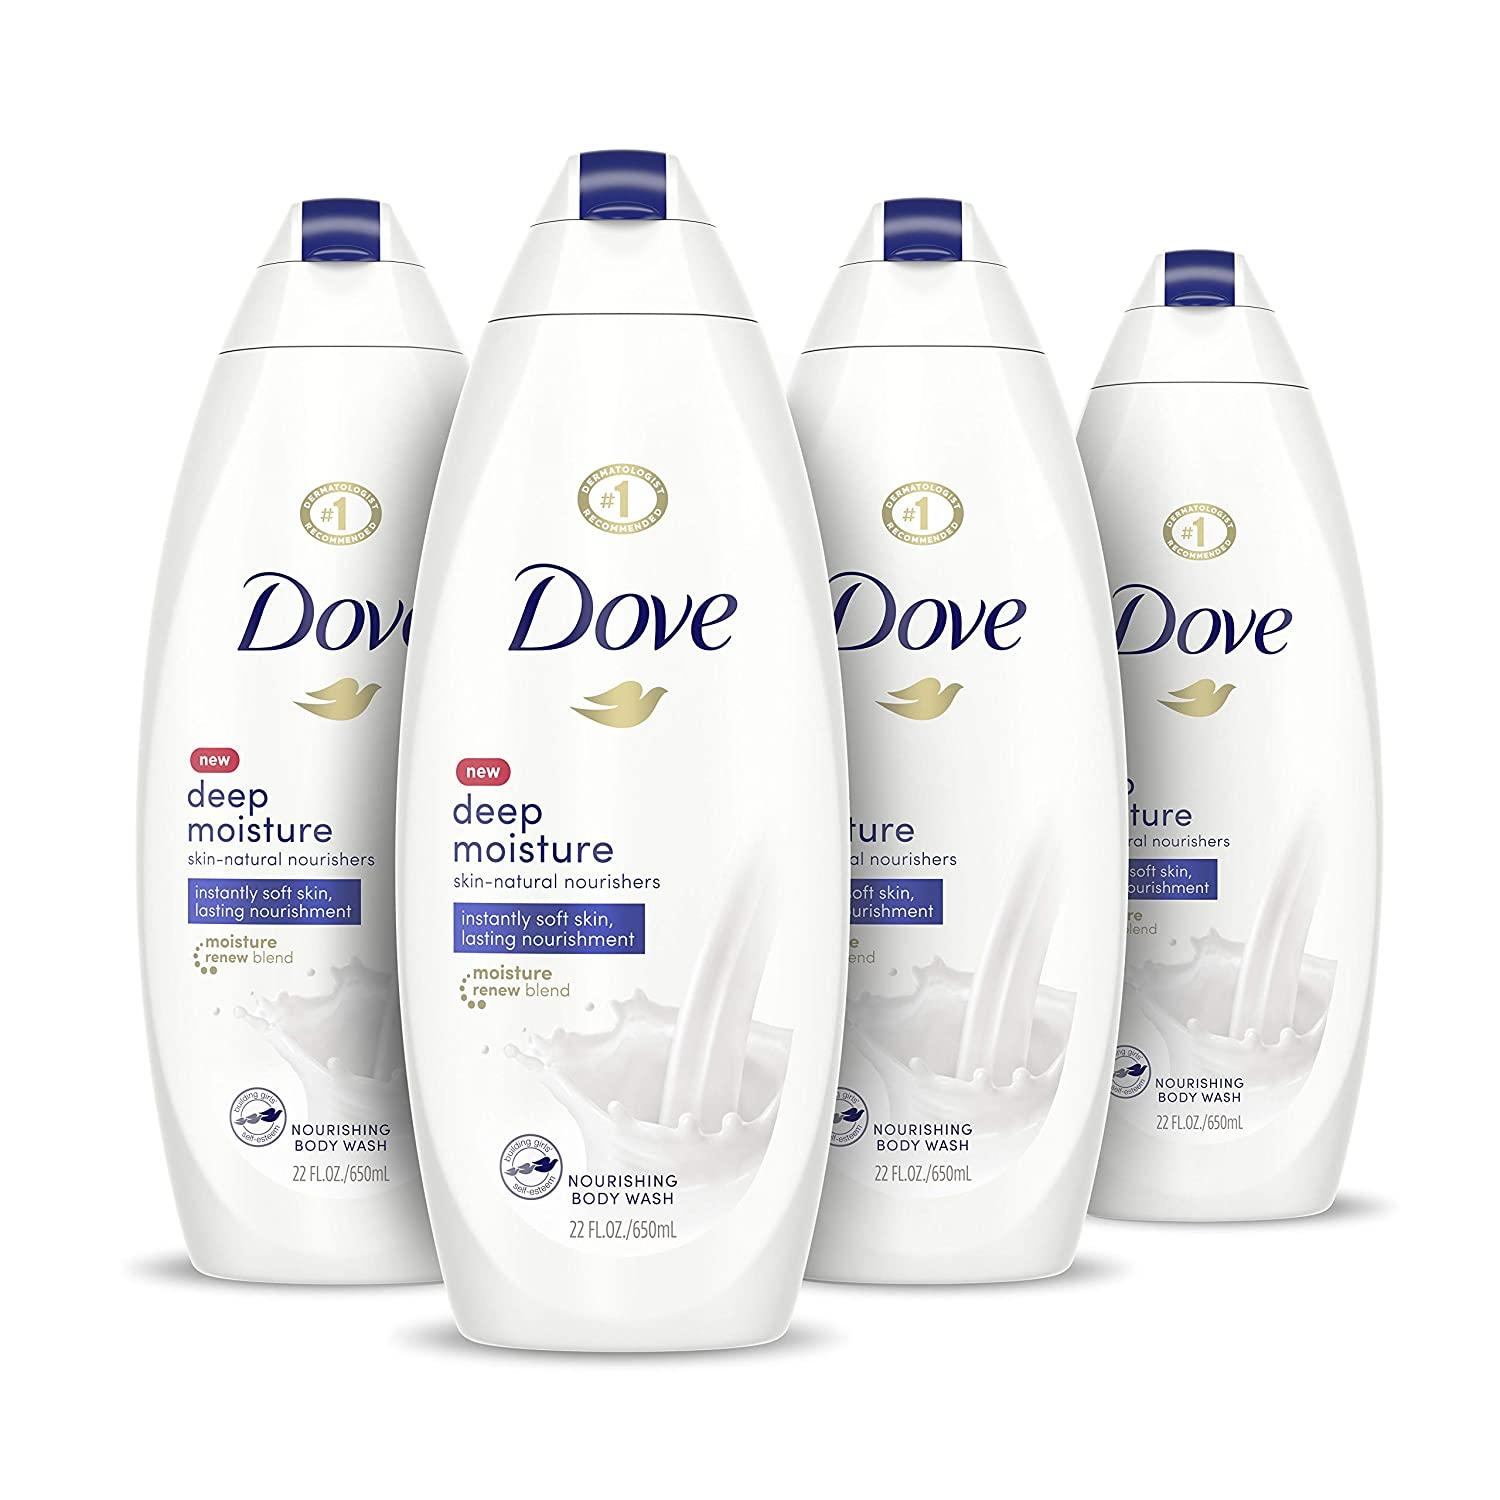 4x Dove Body Wash for $12.82 Shipped